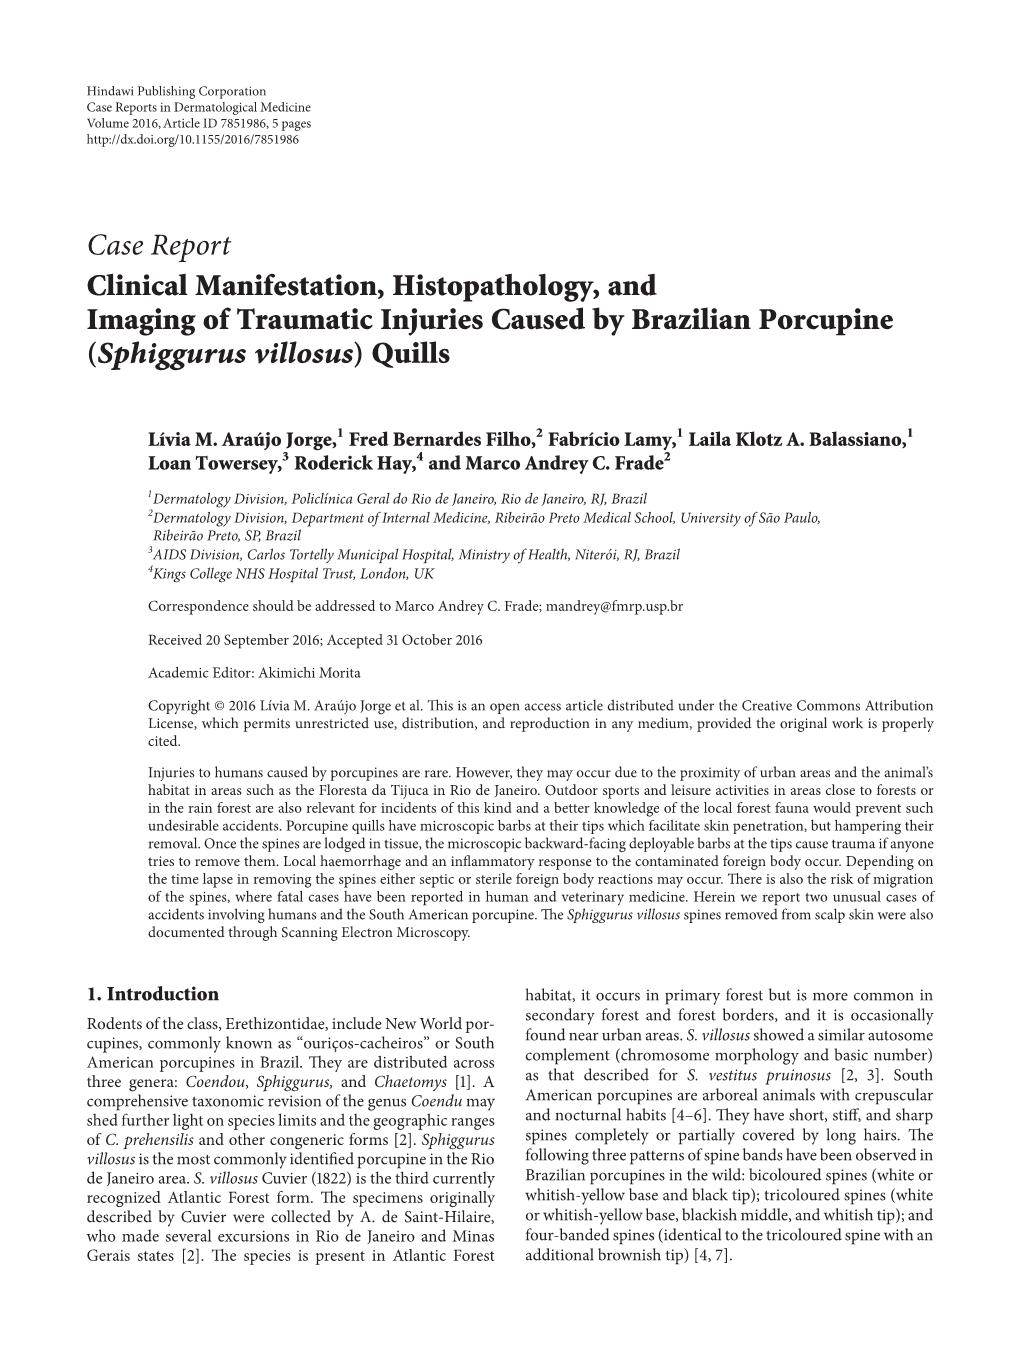 Clinical Manifestation, Histopathology, and Imaging of Traumatic Injuries Caused by Brazilian Porcupine (Sphiggurus Villosus) Quills